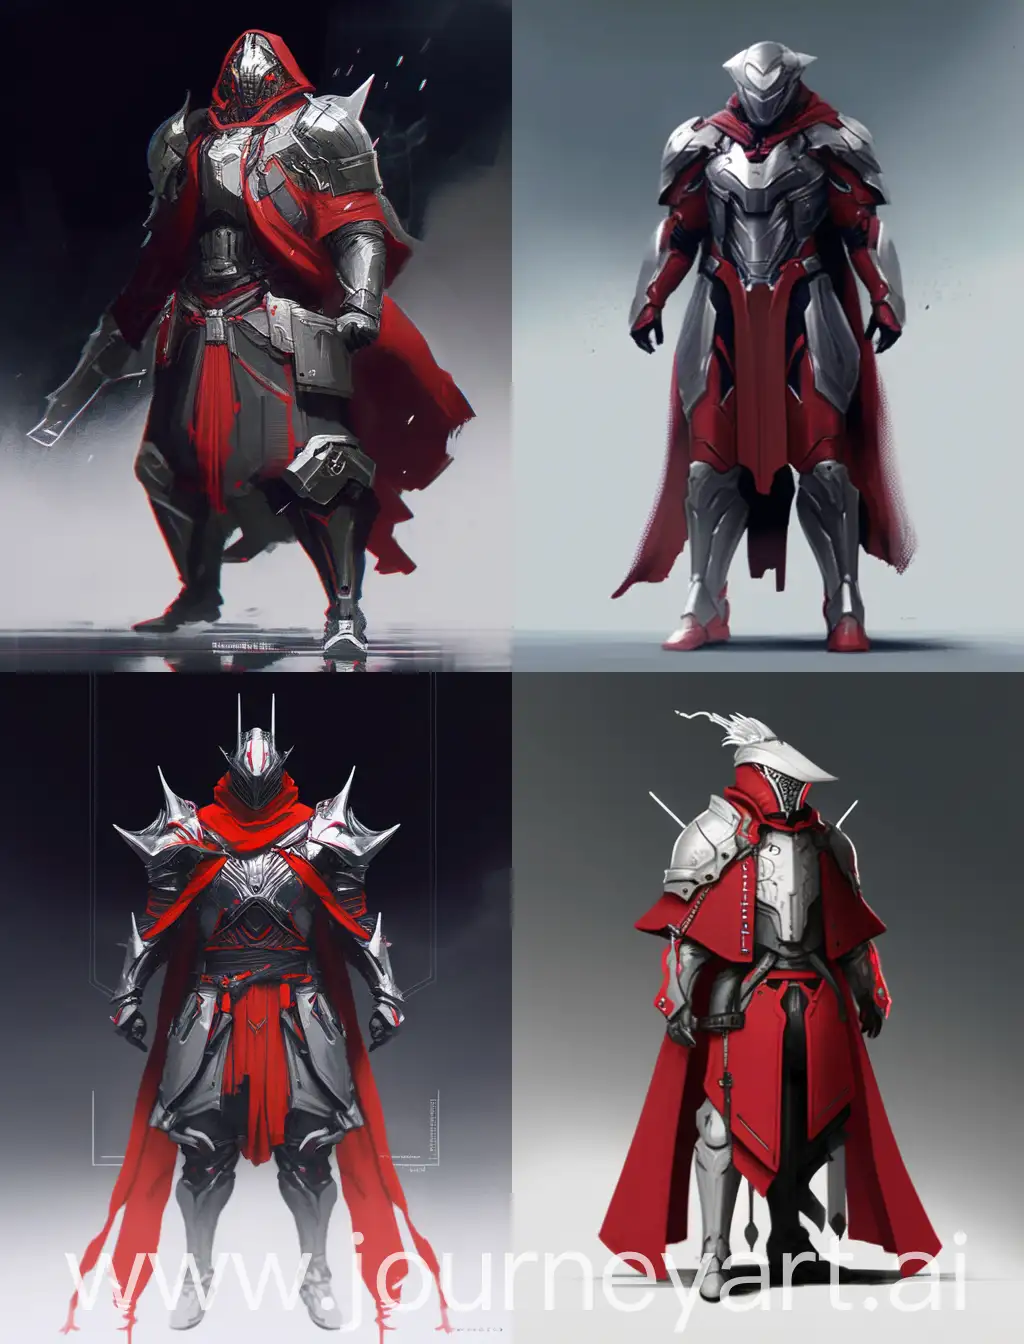 concept game reference style,concept art, armor, red guard, silver tactical suit, long robe